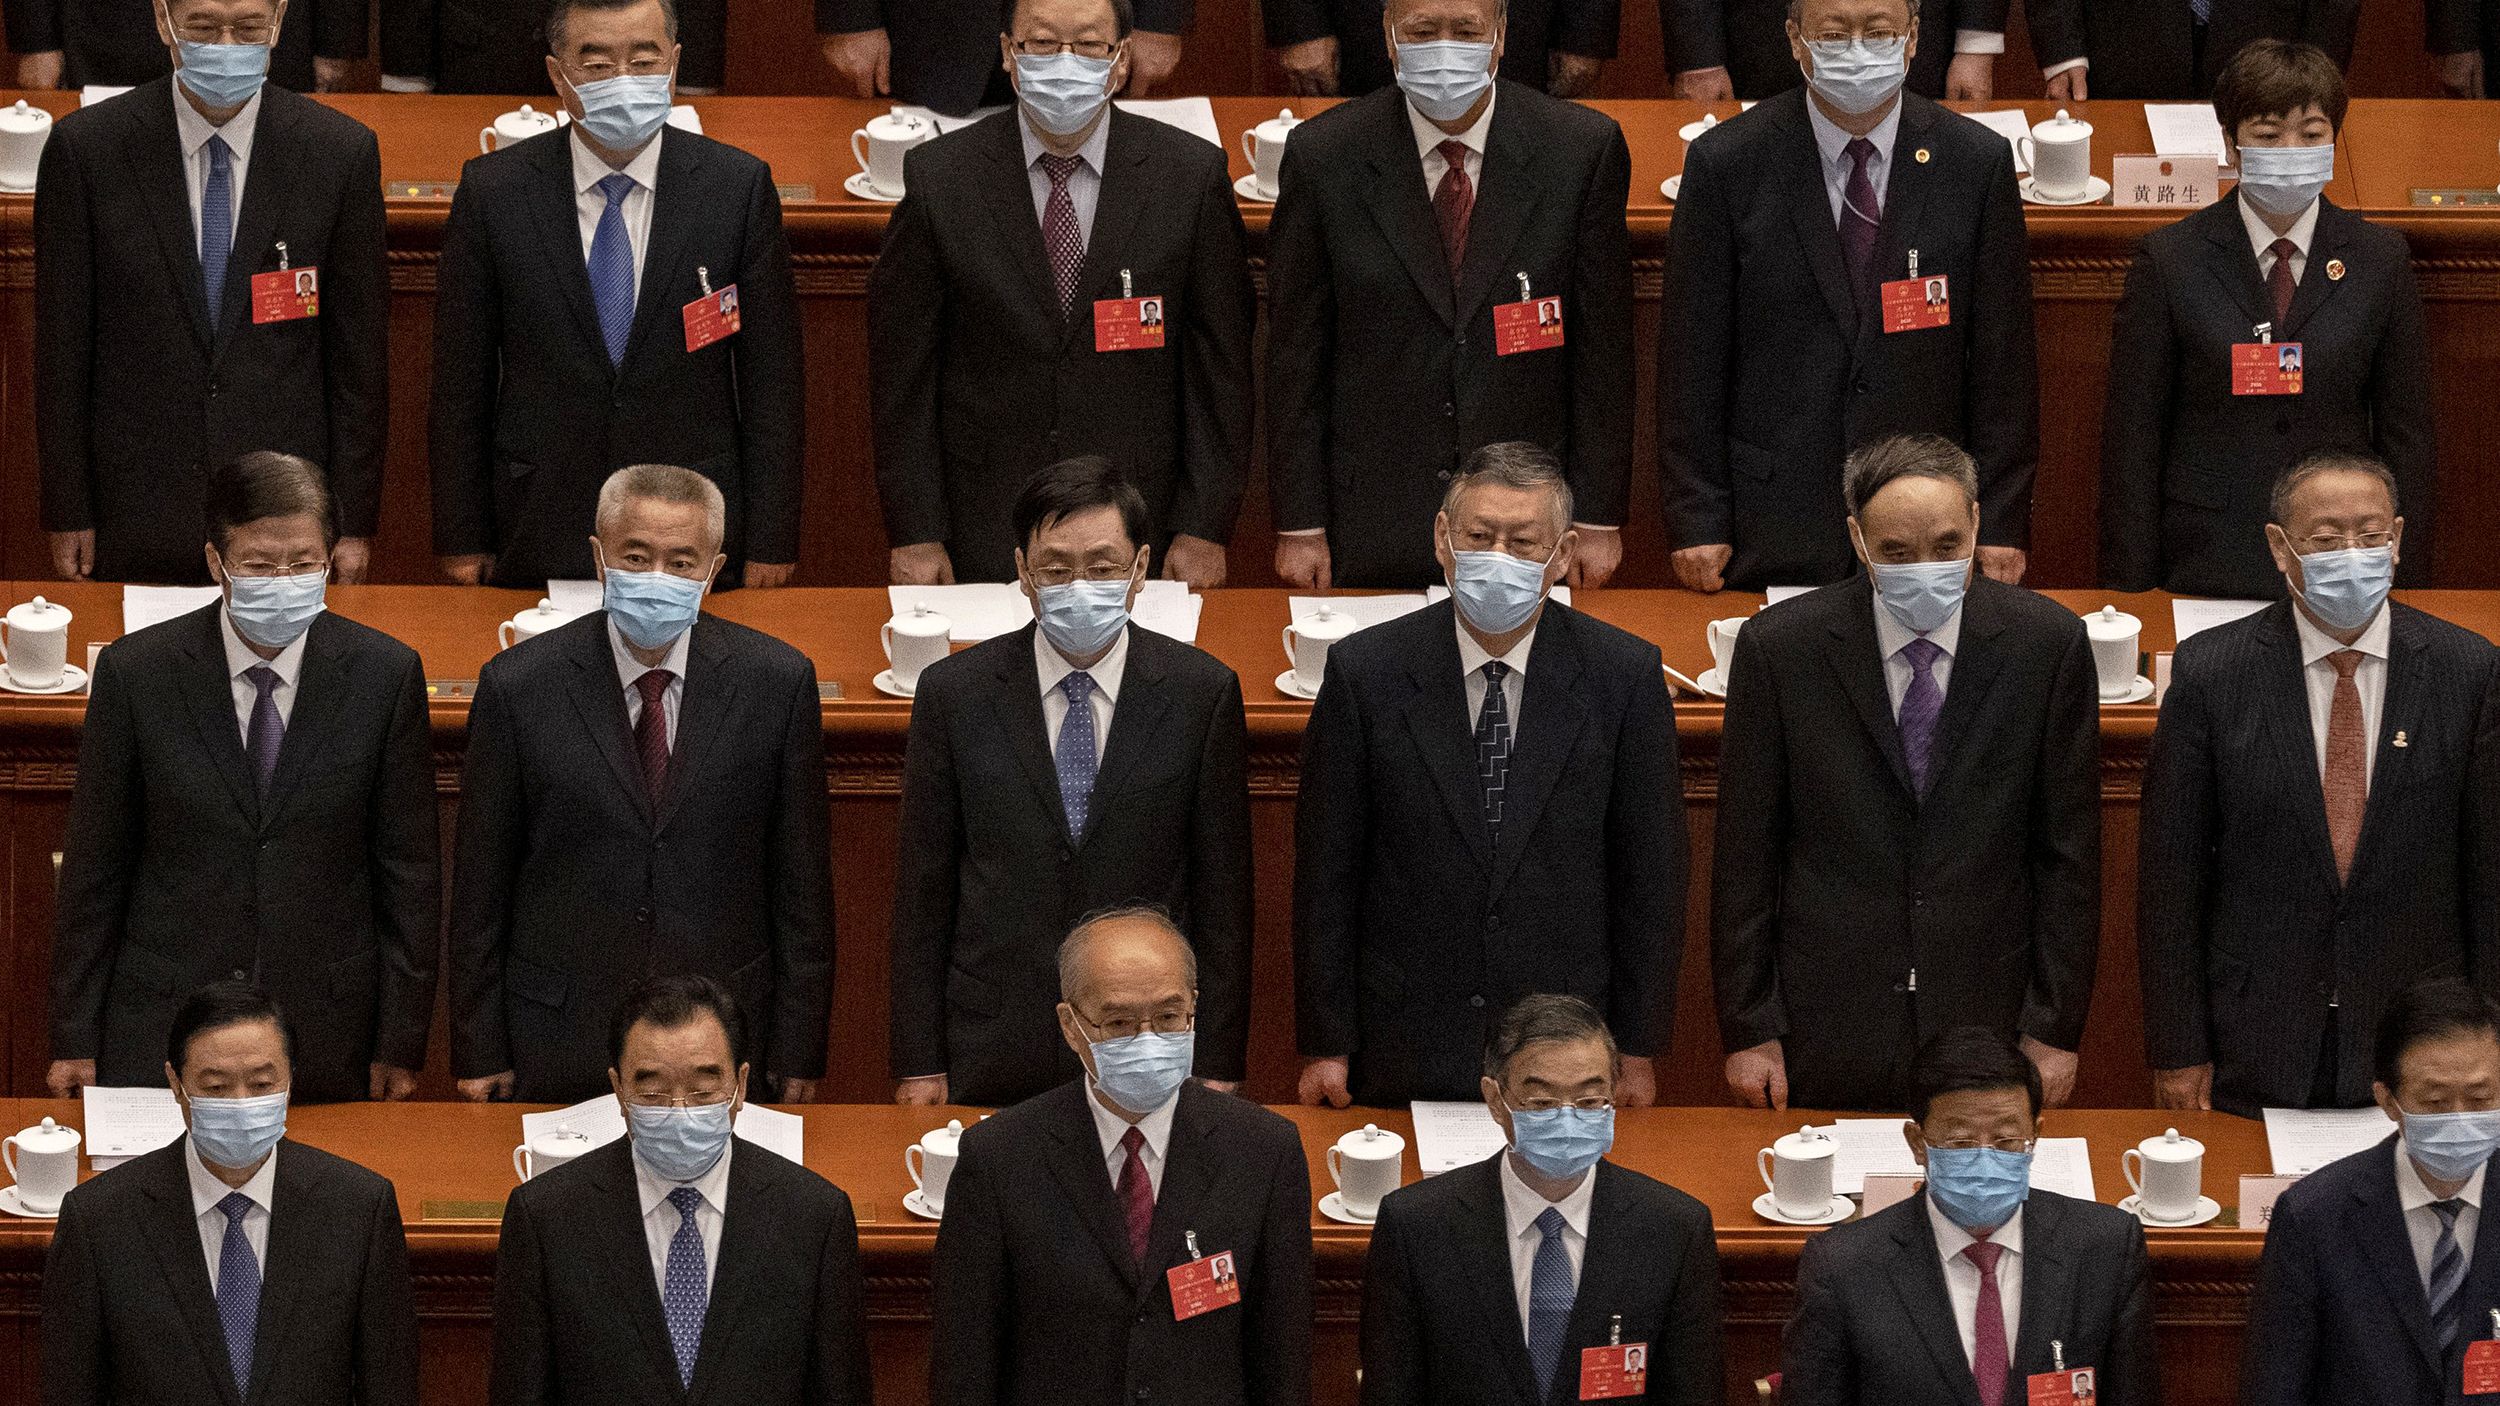 Chinese Communist Party delegates stand for the national anthem at the opening of the National People's Congress on May 22. The annual parliamentary gathering had been postponed.